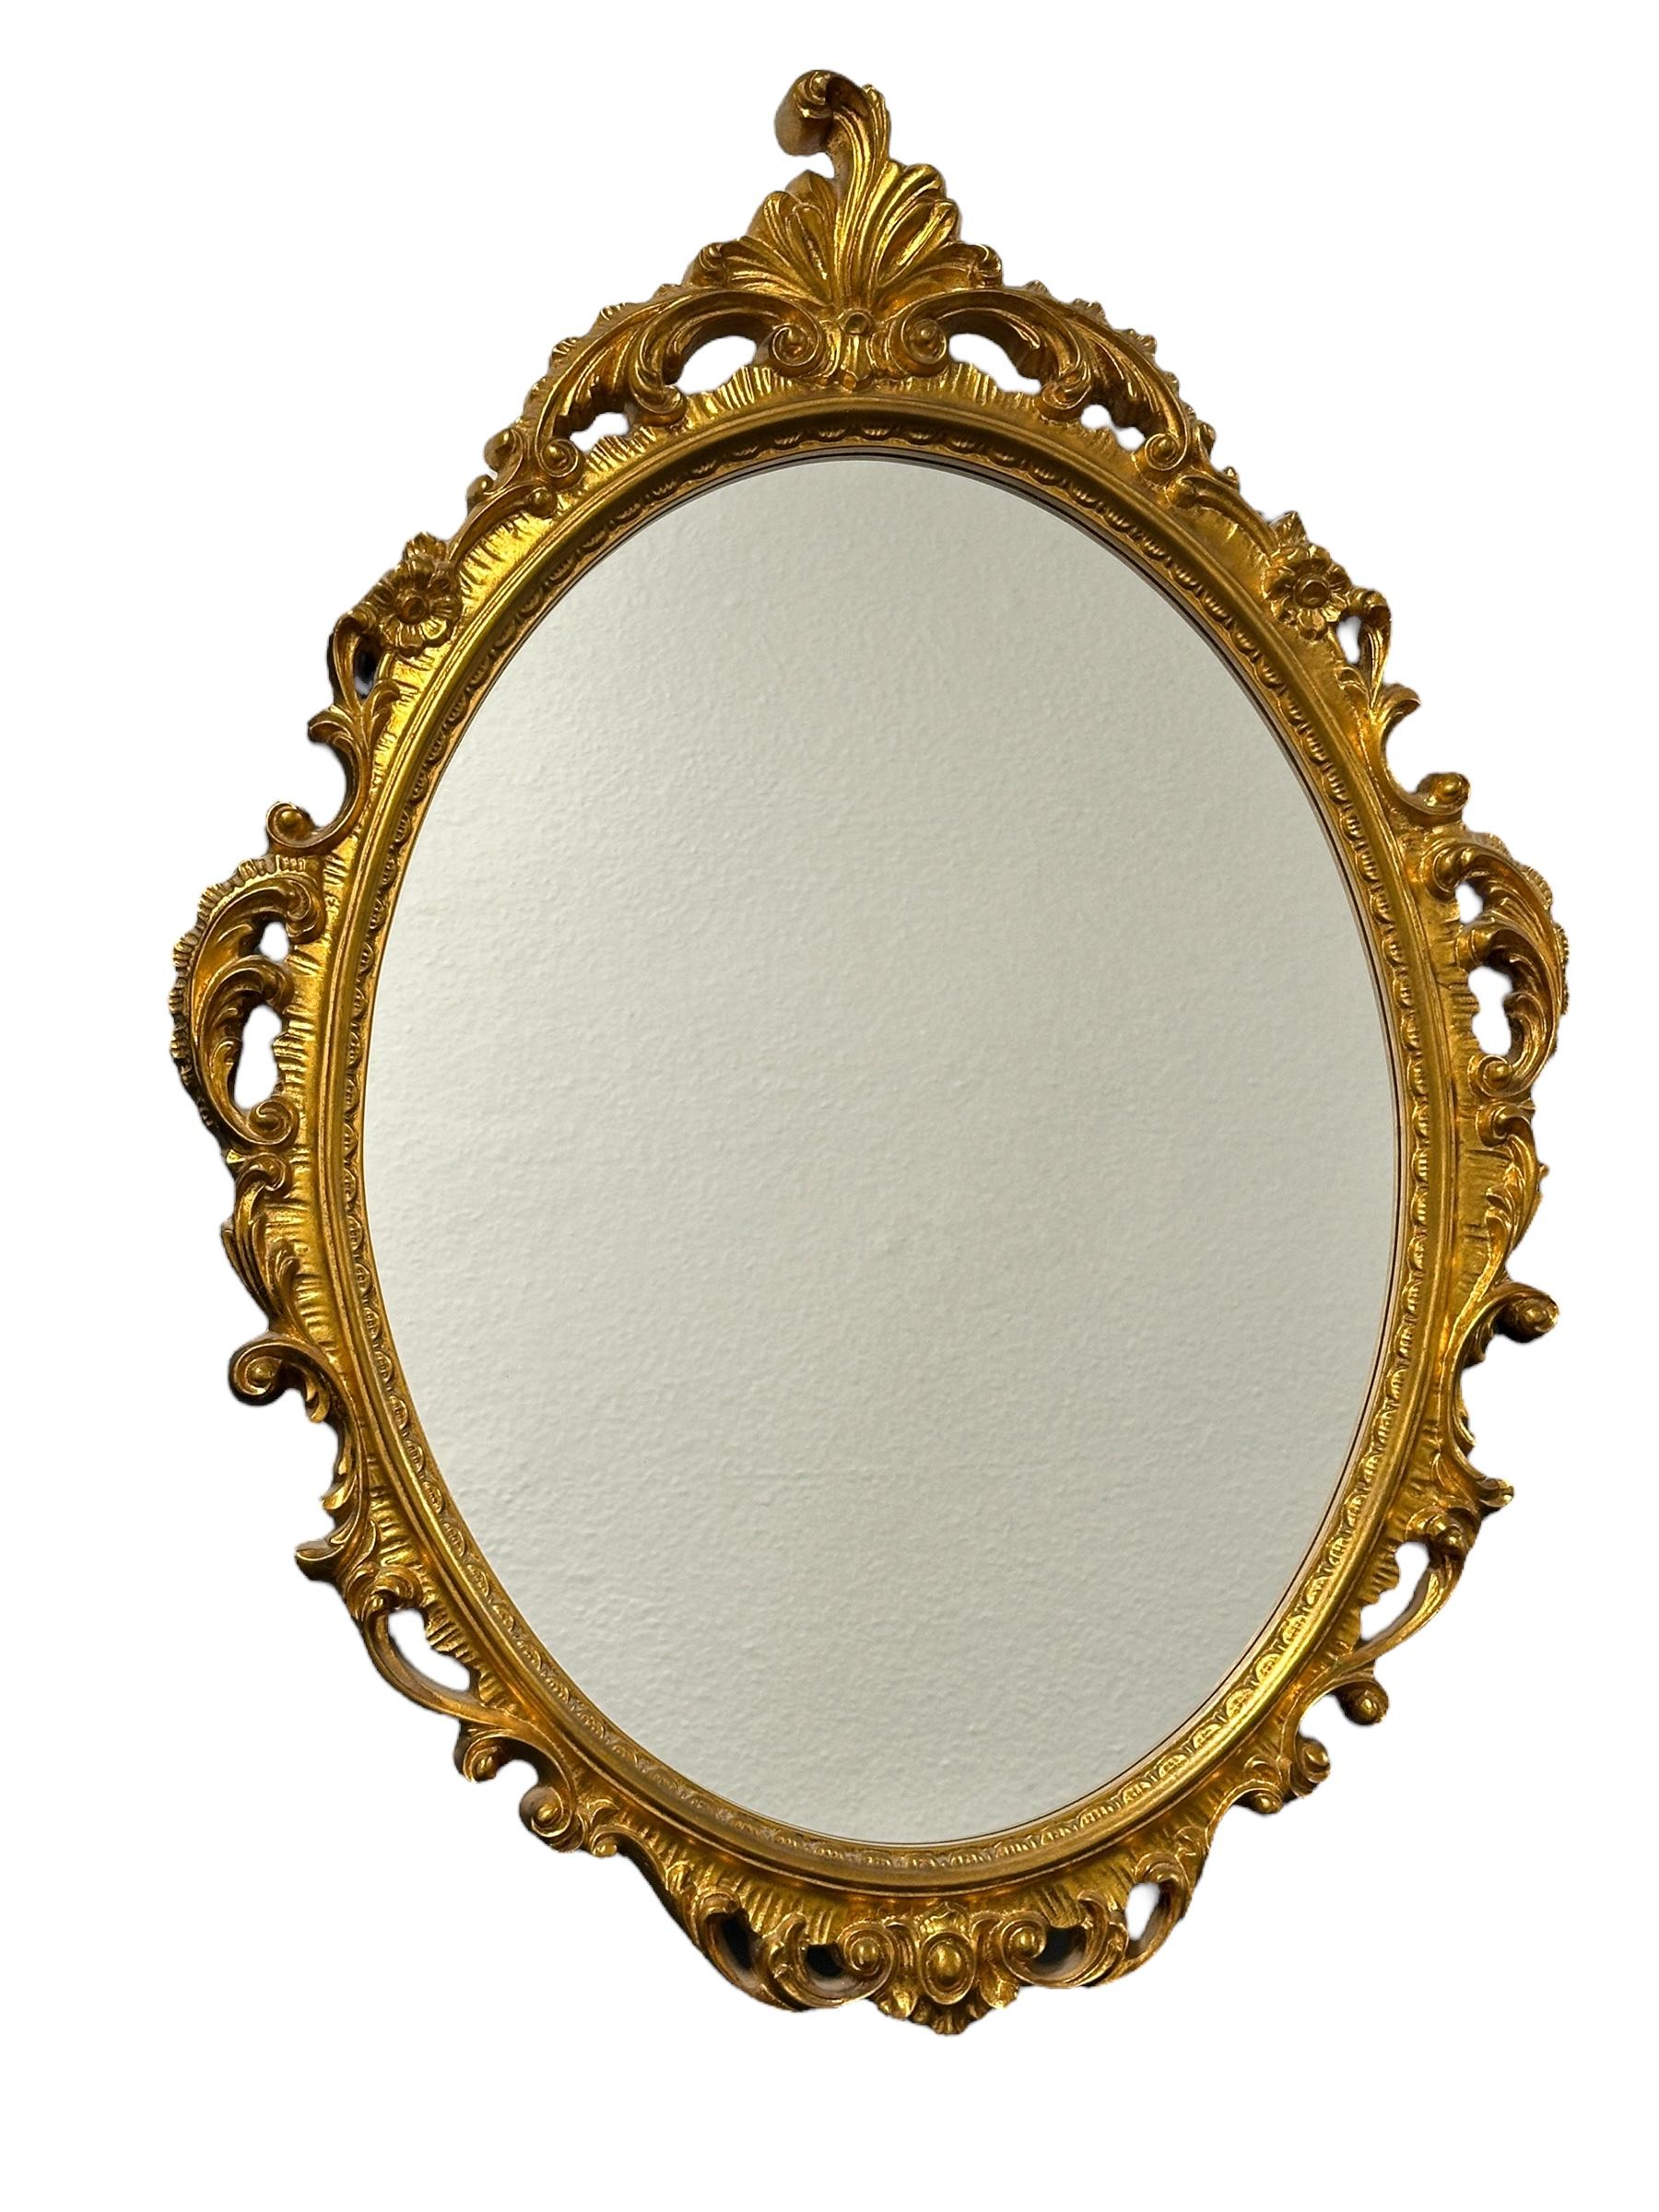 Mid-20th Century Beautiful Stunning Gilded Tole Toleware Mirror Vintage, Italy, 1950s For Sale